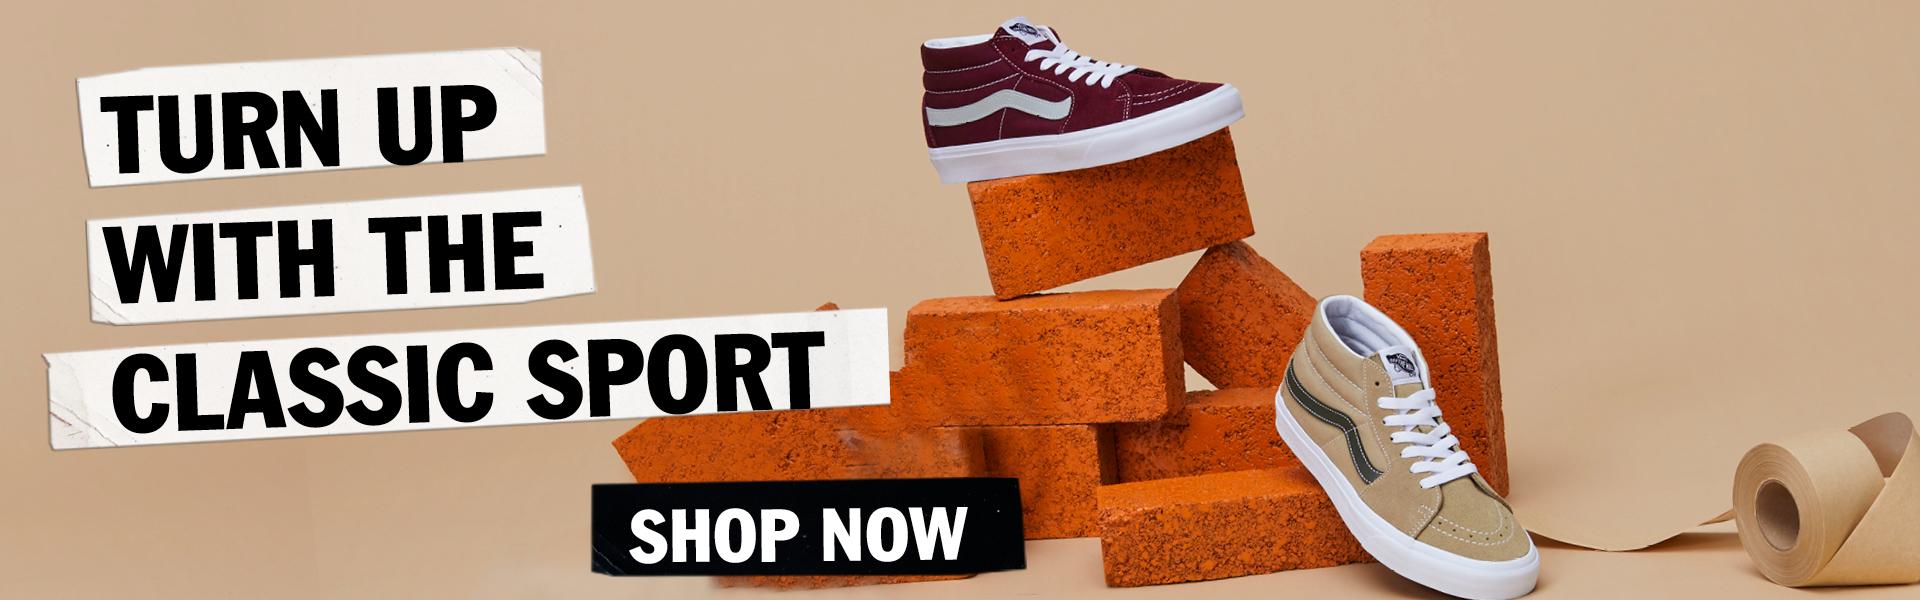 Extra 20% OFF on full priced items at Vans